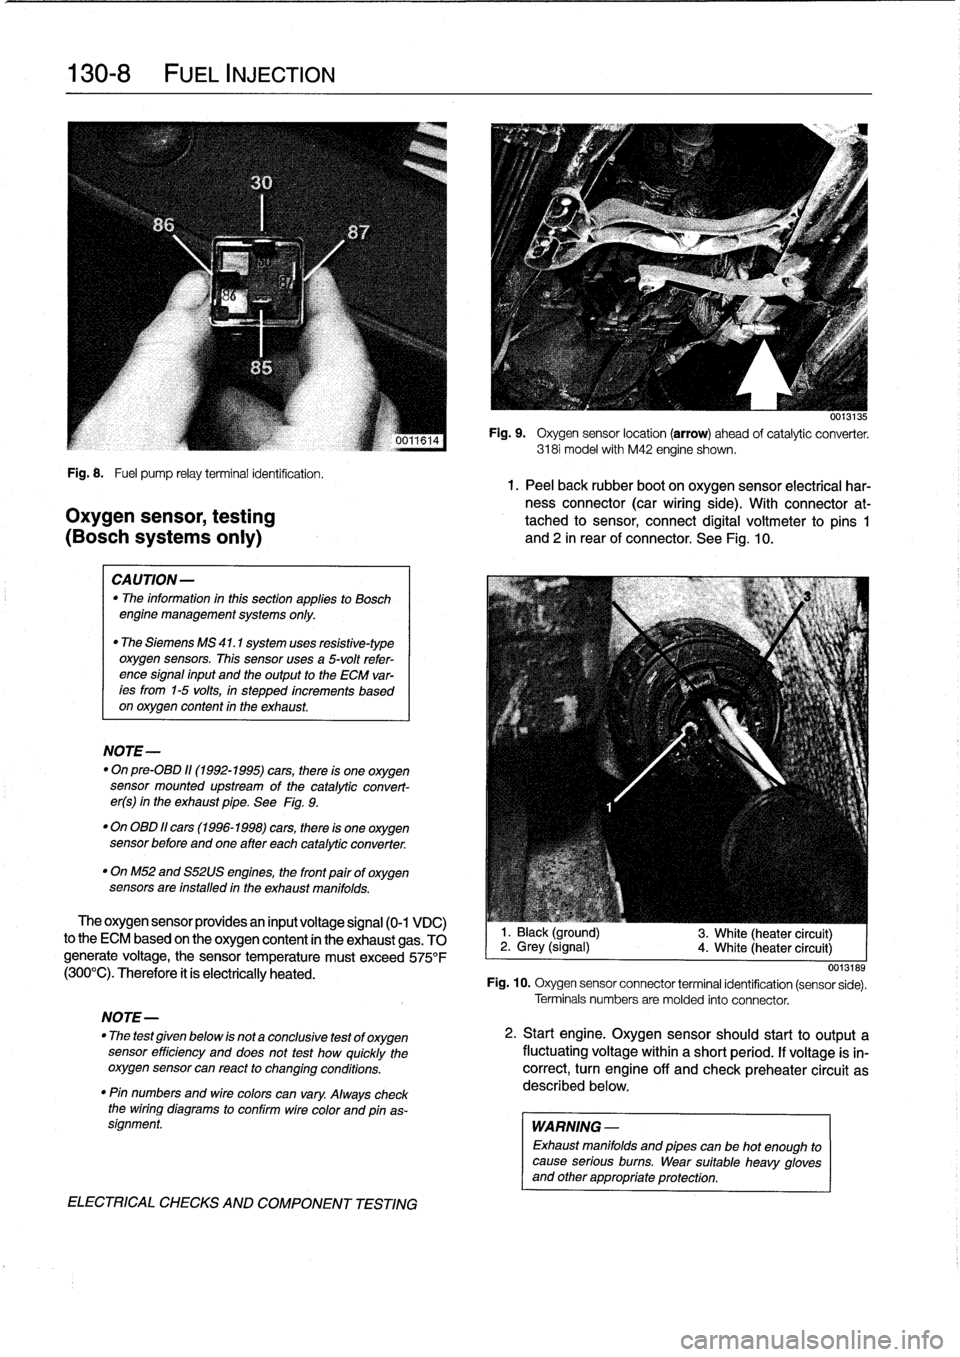 BMW 323i 1998 E36 Workshop Manual 
130-
8

	

FUEL
INJECTION

Fig
.
8
.

	

Fuel
pump
relayterminal
identification
.
1.
Peel
back
rubber
boot
on
oxygen
sensor
electrical
har-
ness
connector
(car
wiring
side)
.
With
connector
at-
Oxyge